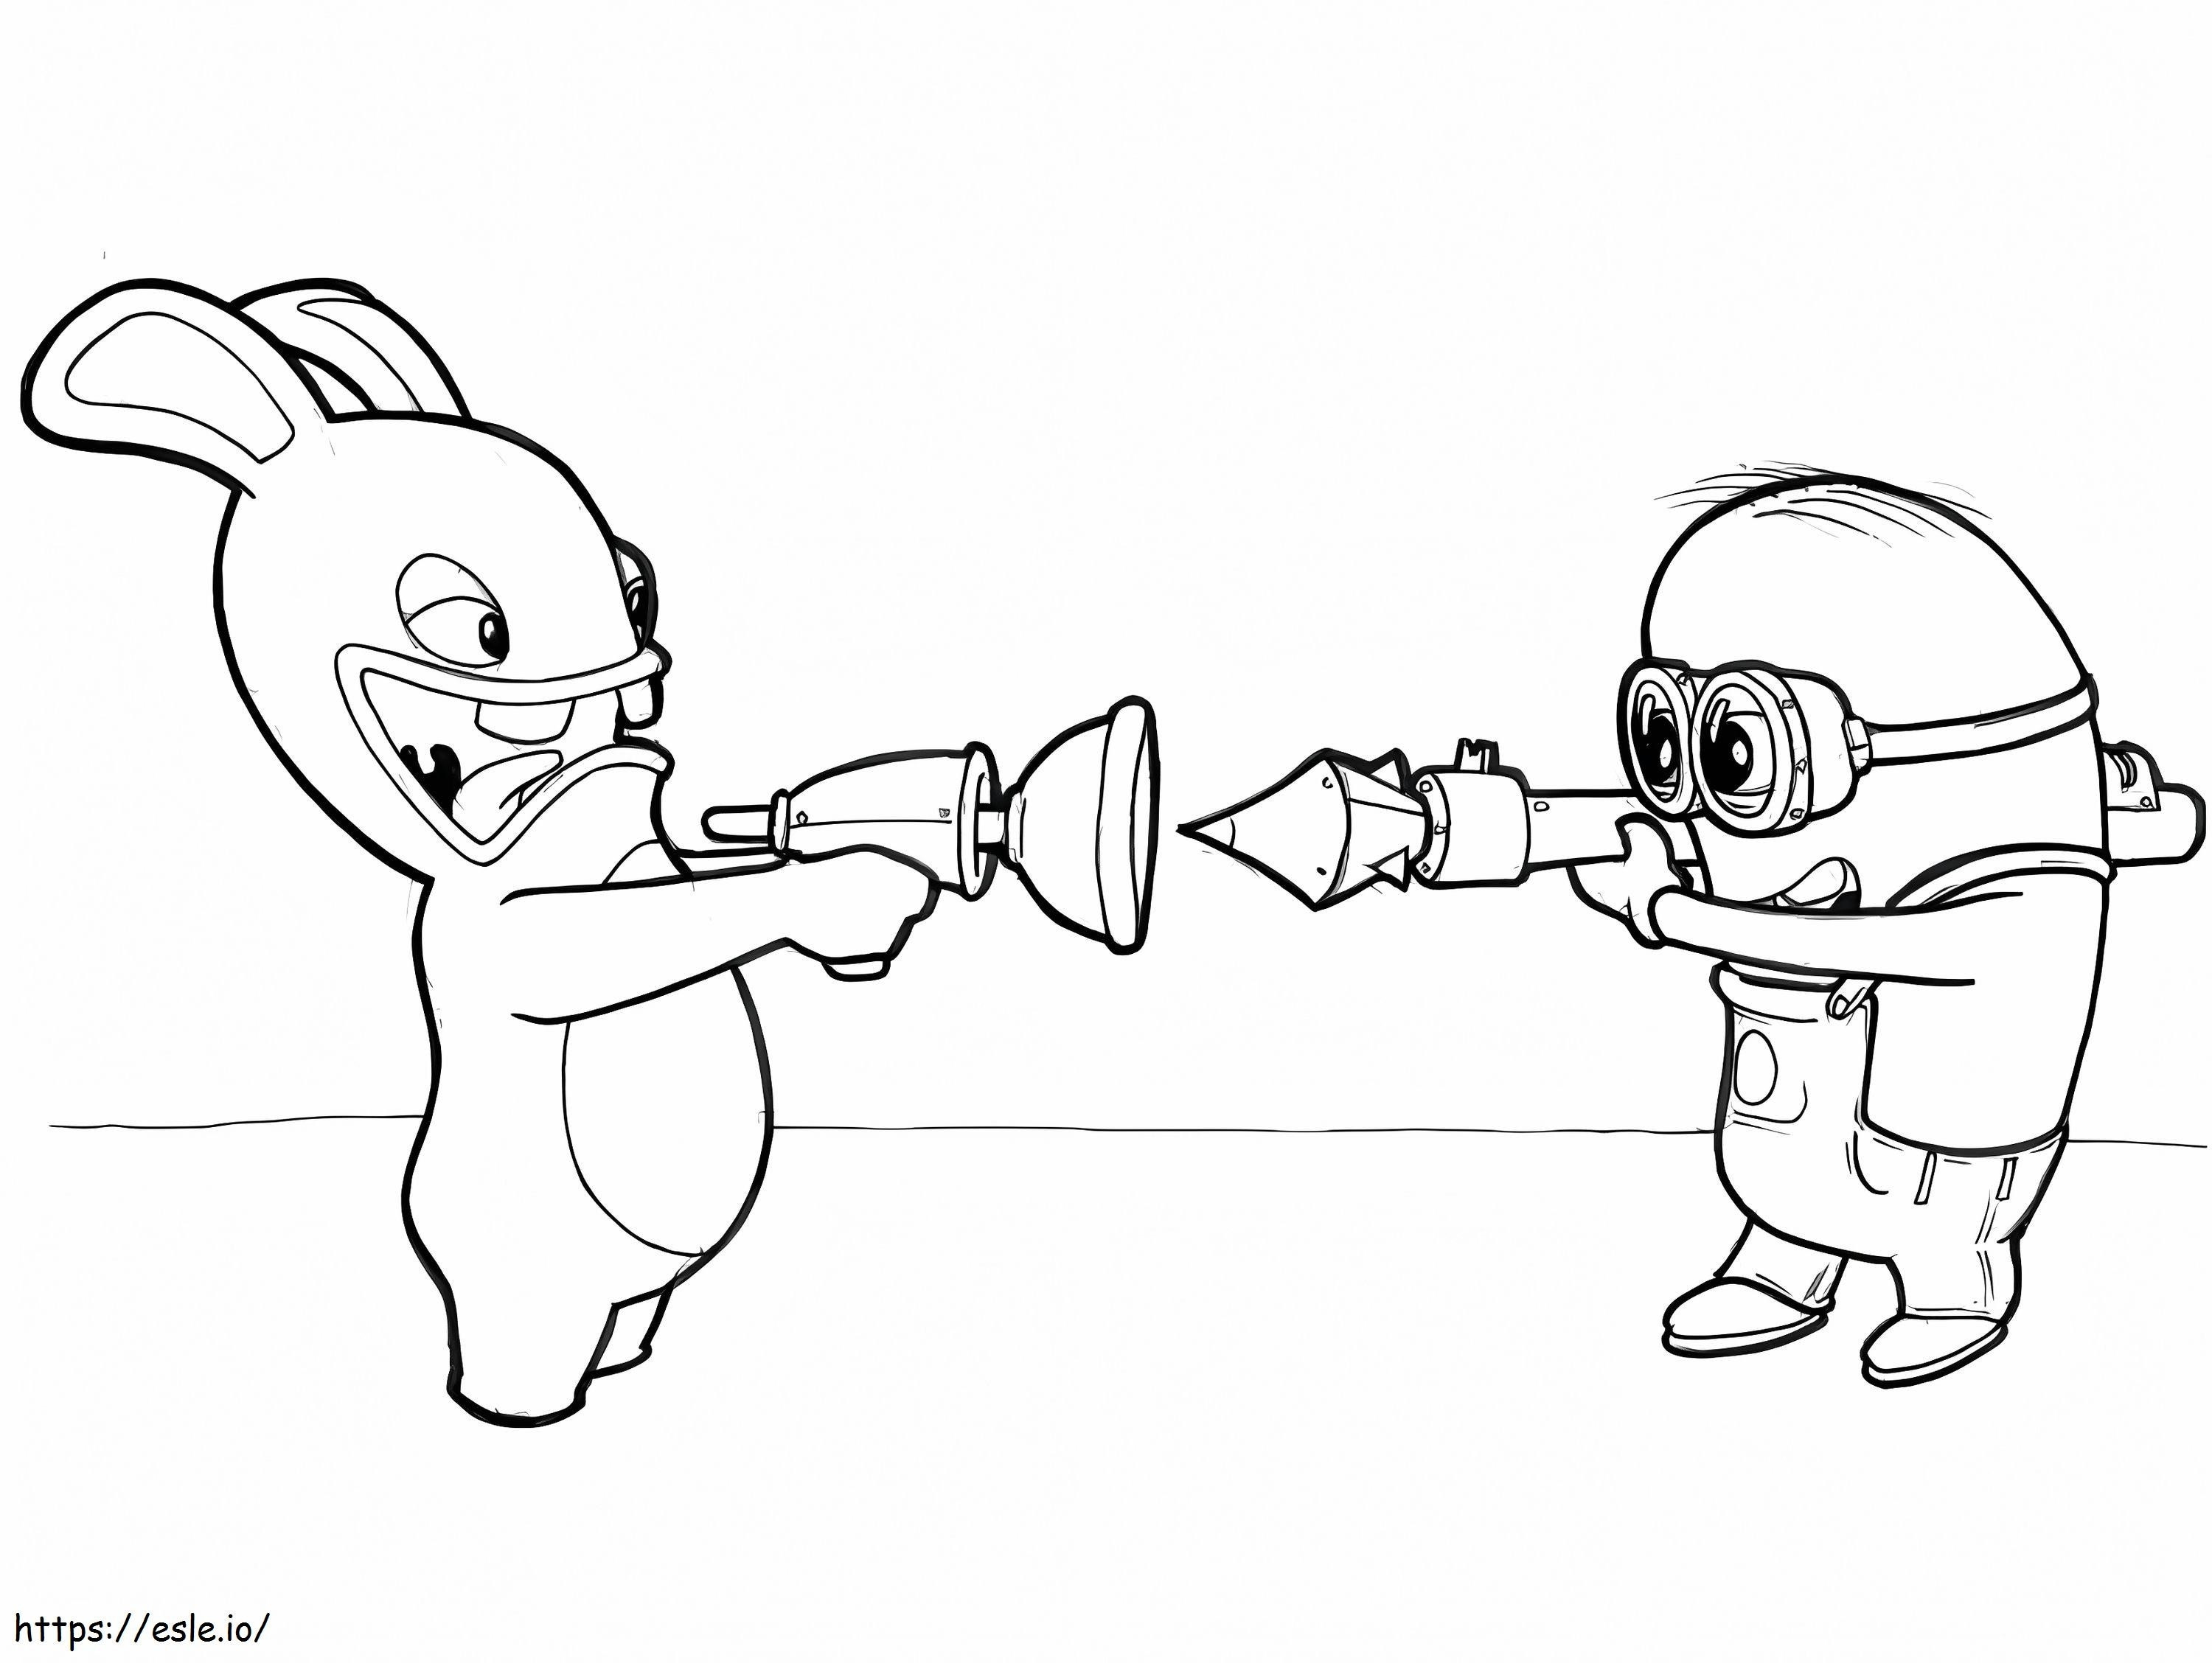 Minion And Raving Rabbids coloring page